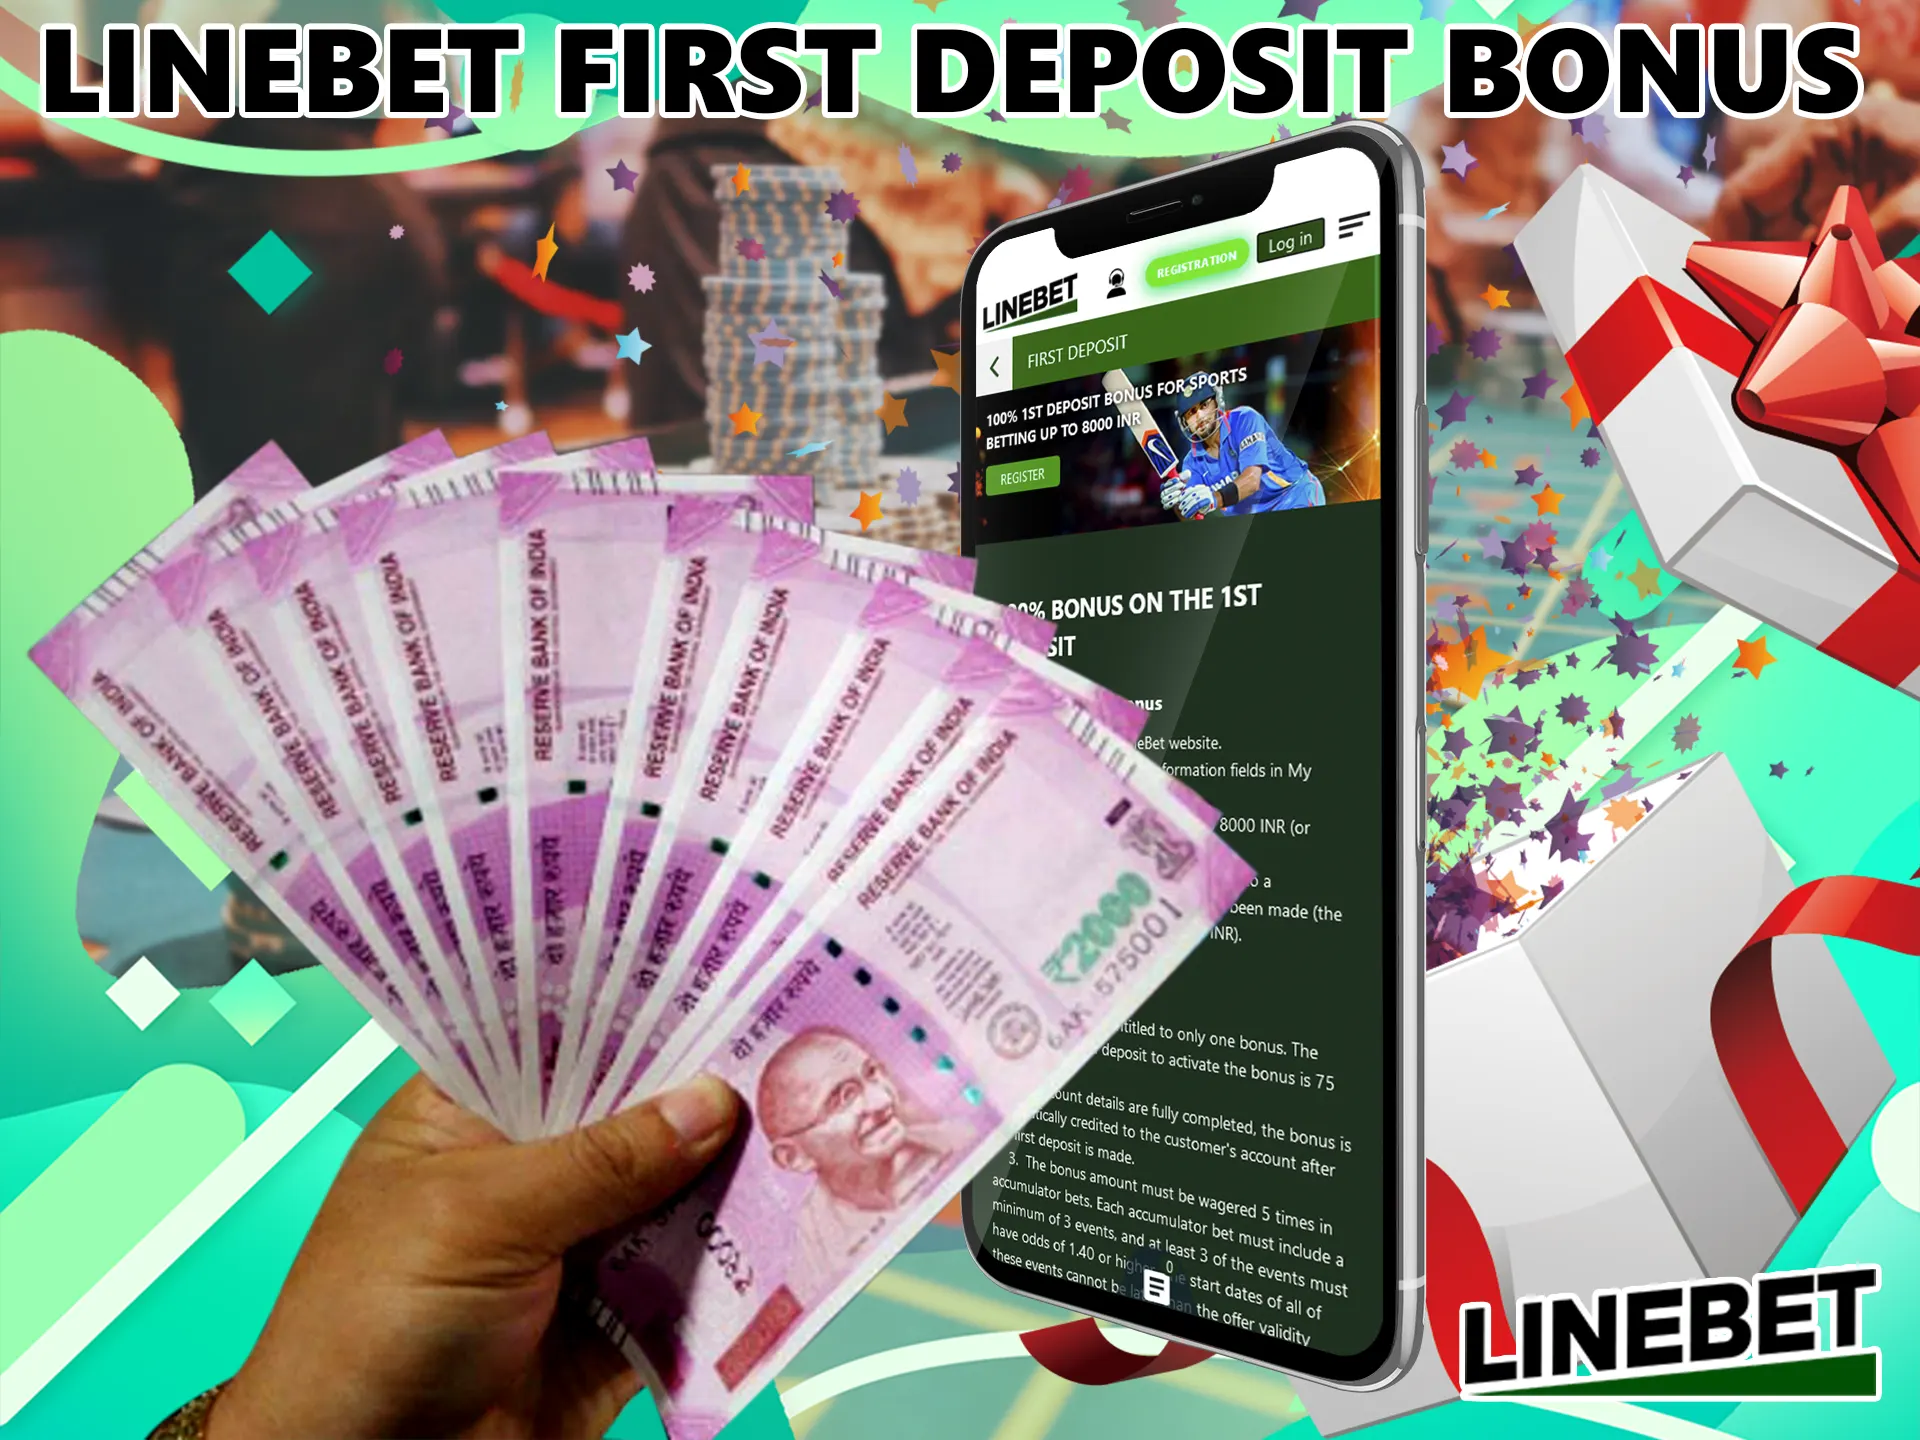 At Linebet casino, you can double your first transfer to a virtual casino account.